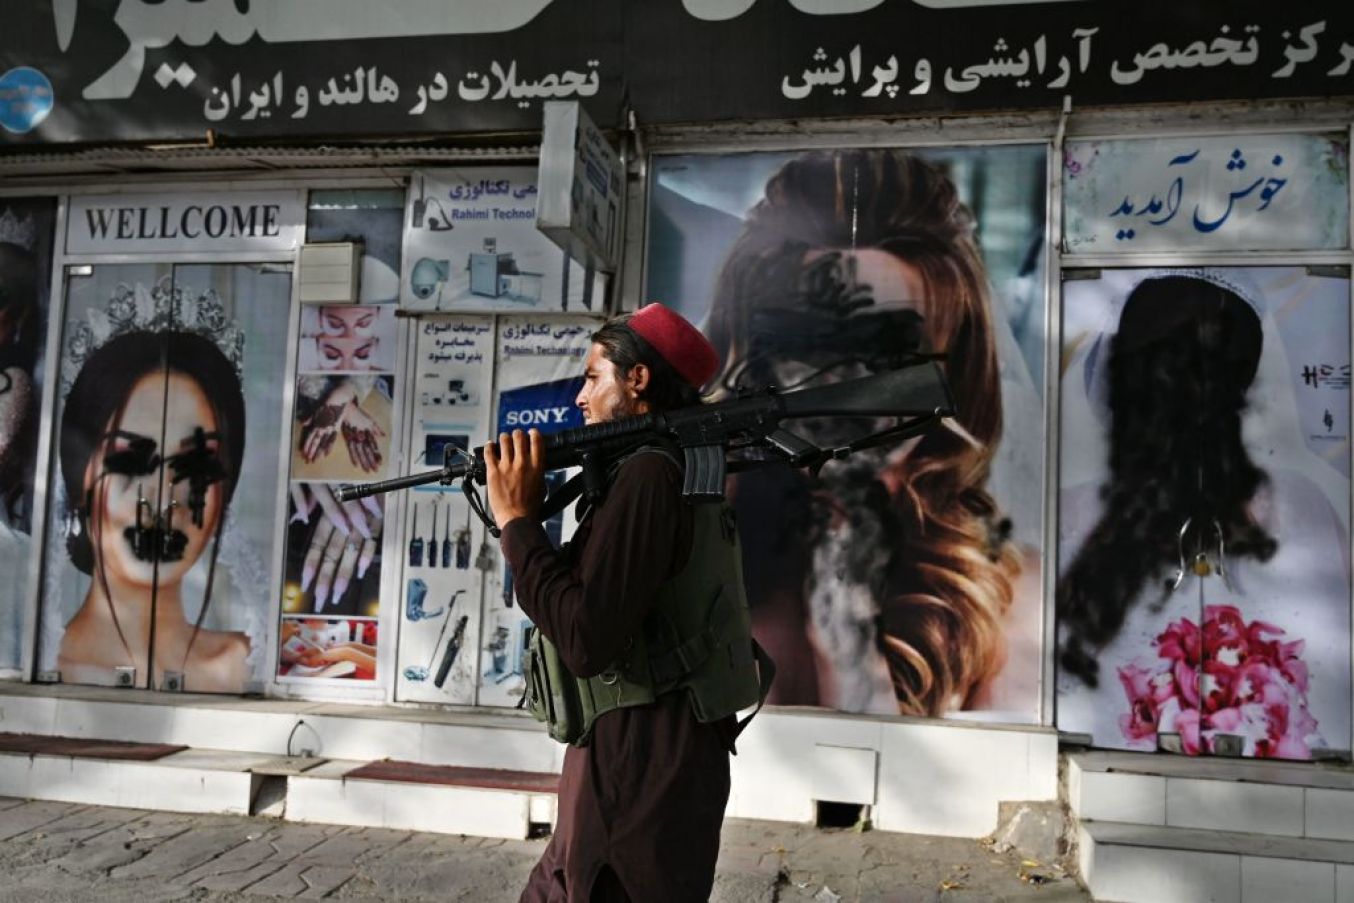 A Taliban Fighter Walks Past A Beauty Salon With Images Of Women Defaced Using Spray Paint In In Kabul. Photo: Wakil Kohsar/Afp Via Getty Images